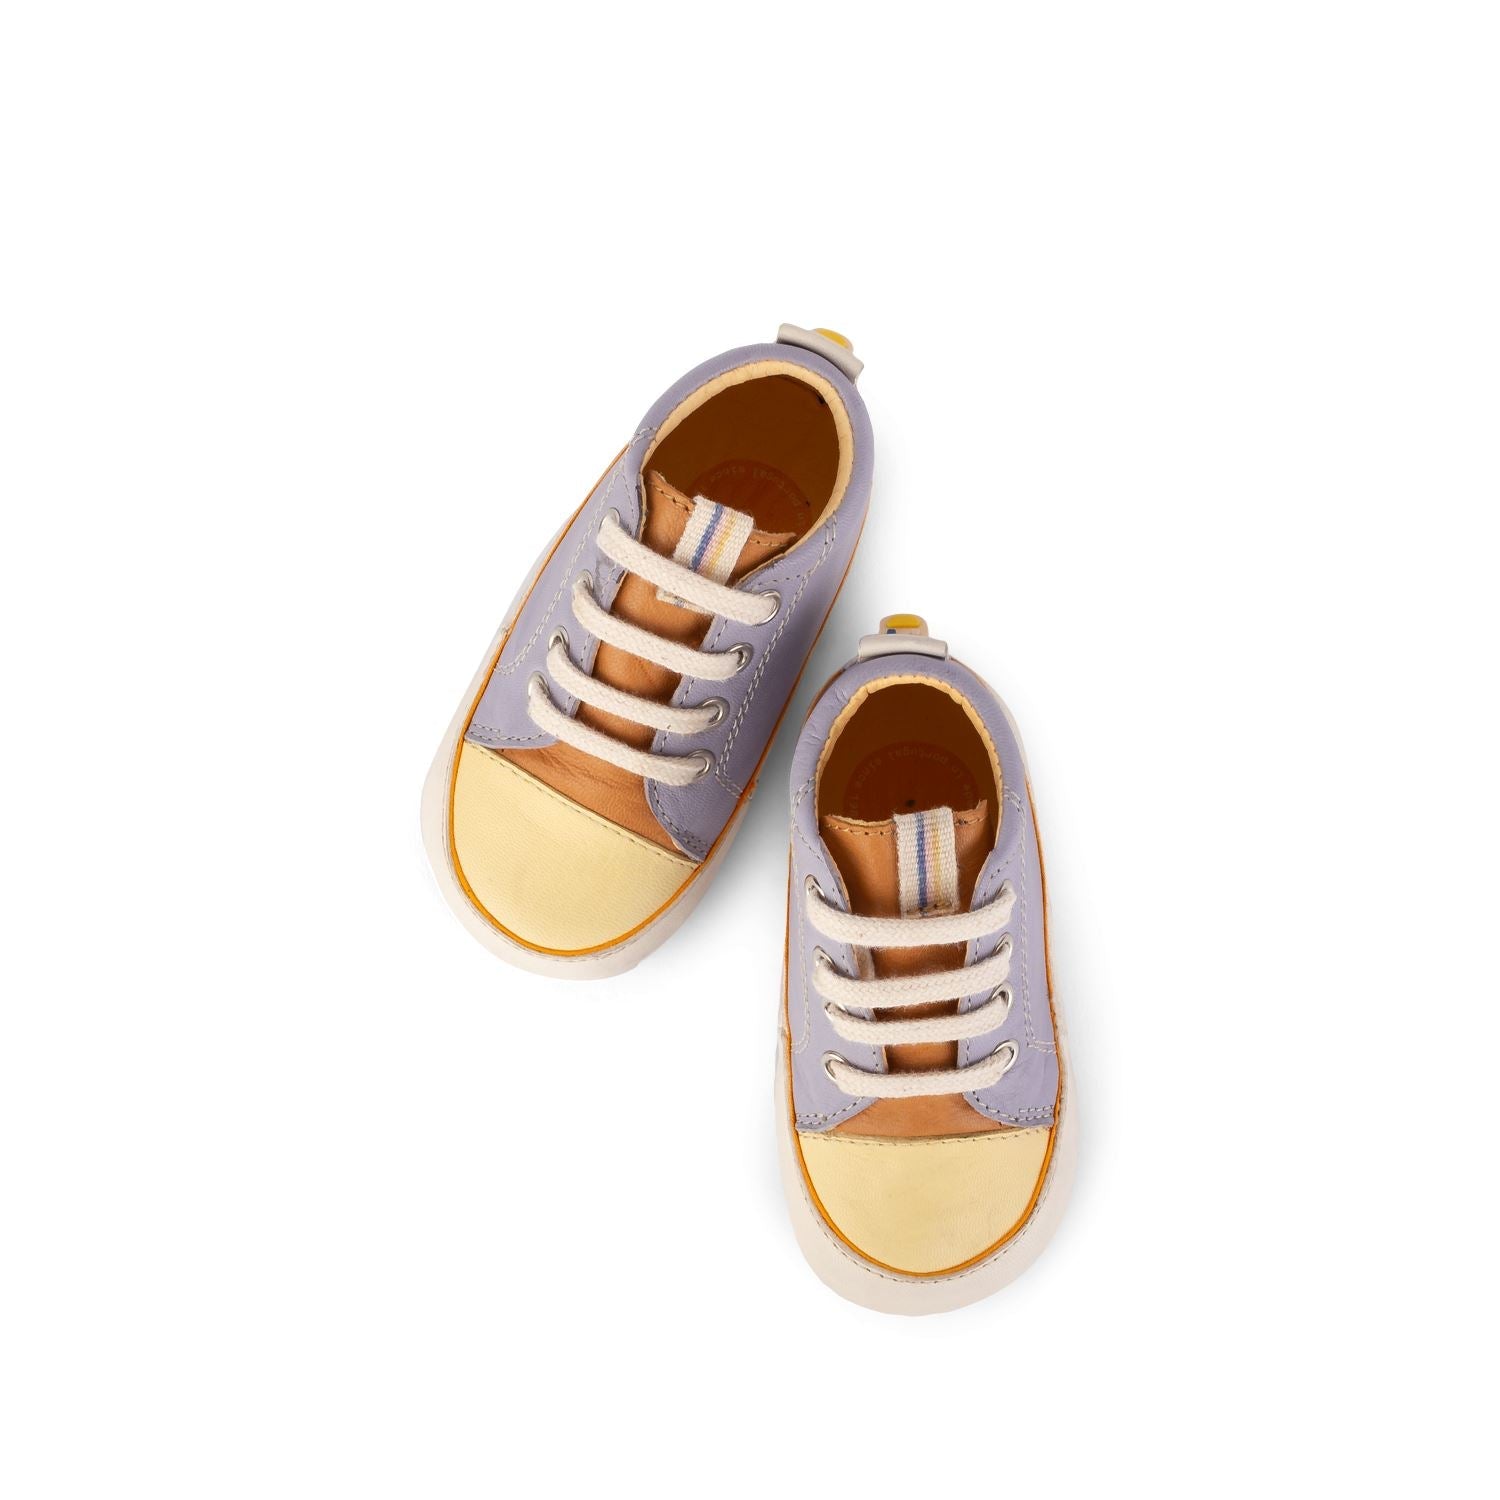 Blue/Camel Sneaker Booties Shoes & Booties Dulis Shoes 